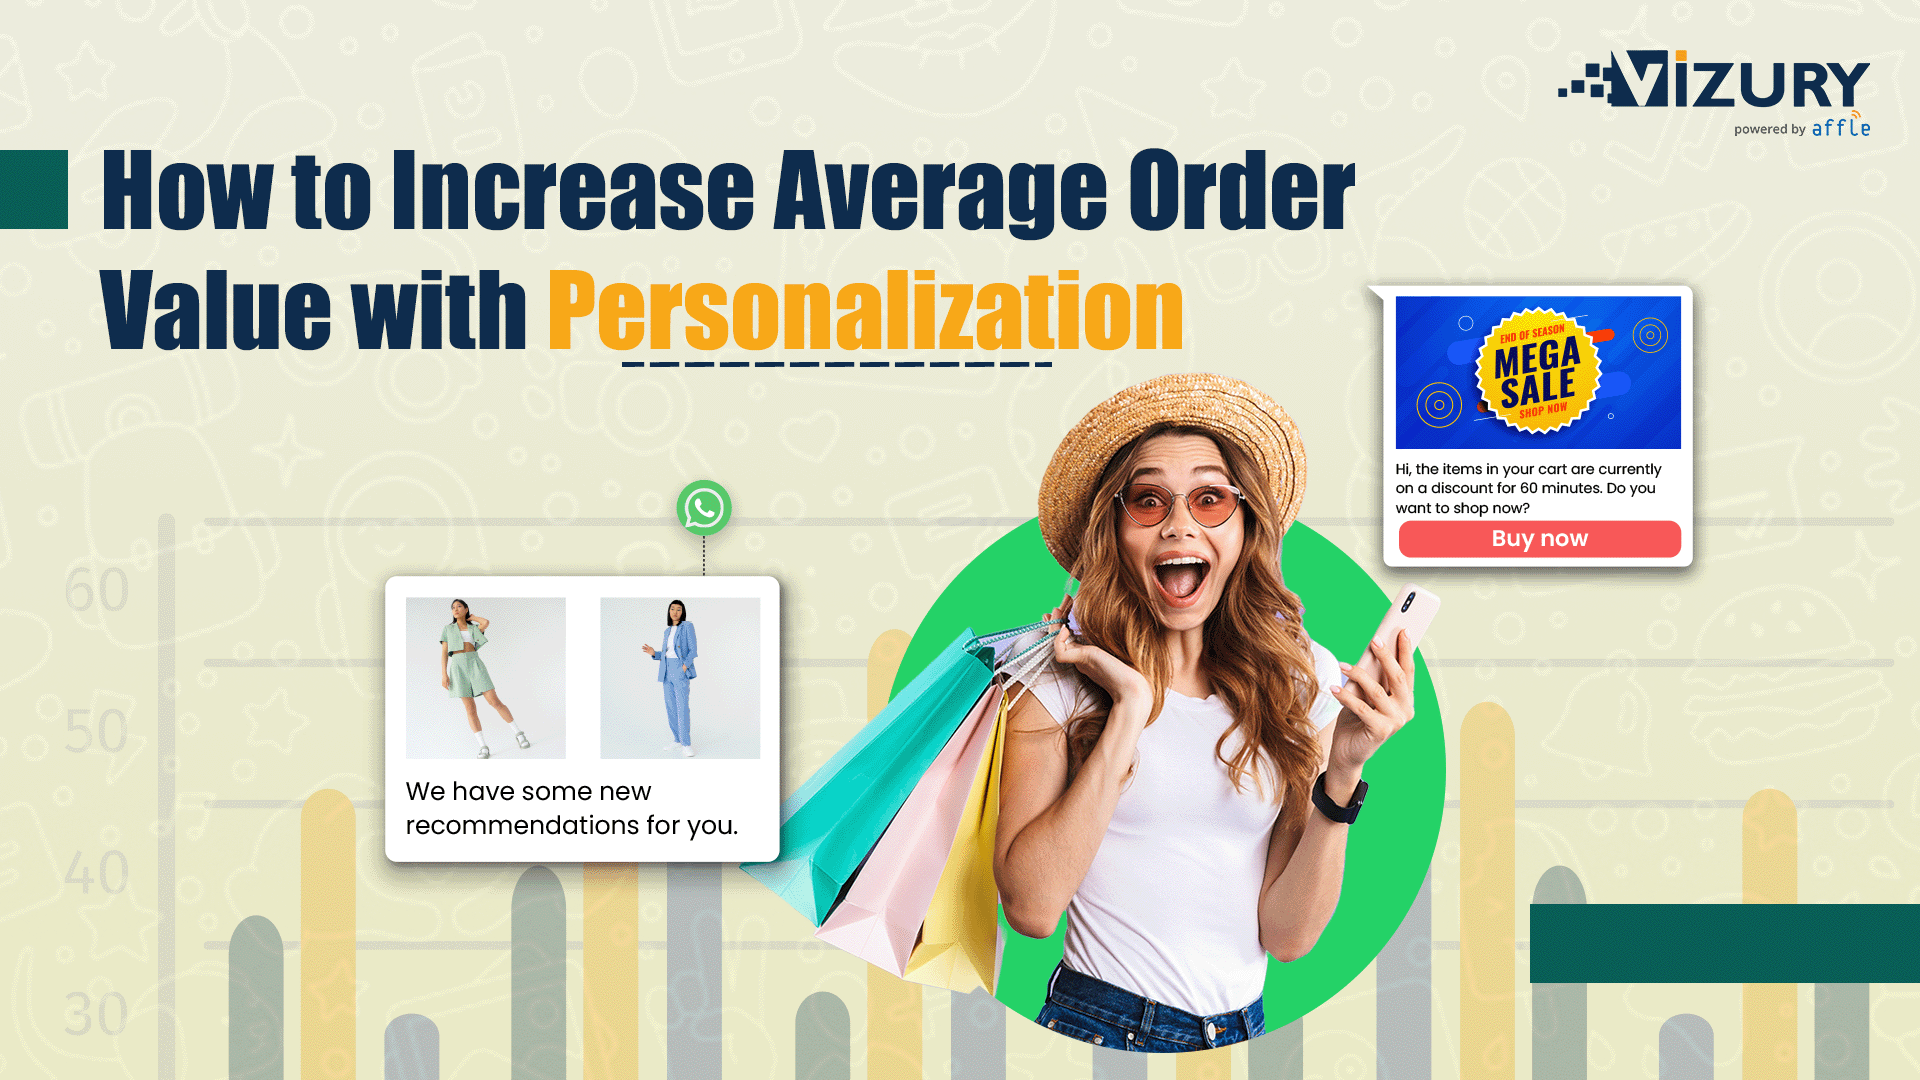 How to Increase Average Order Value with Personalization